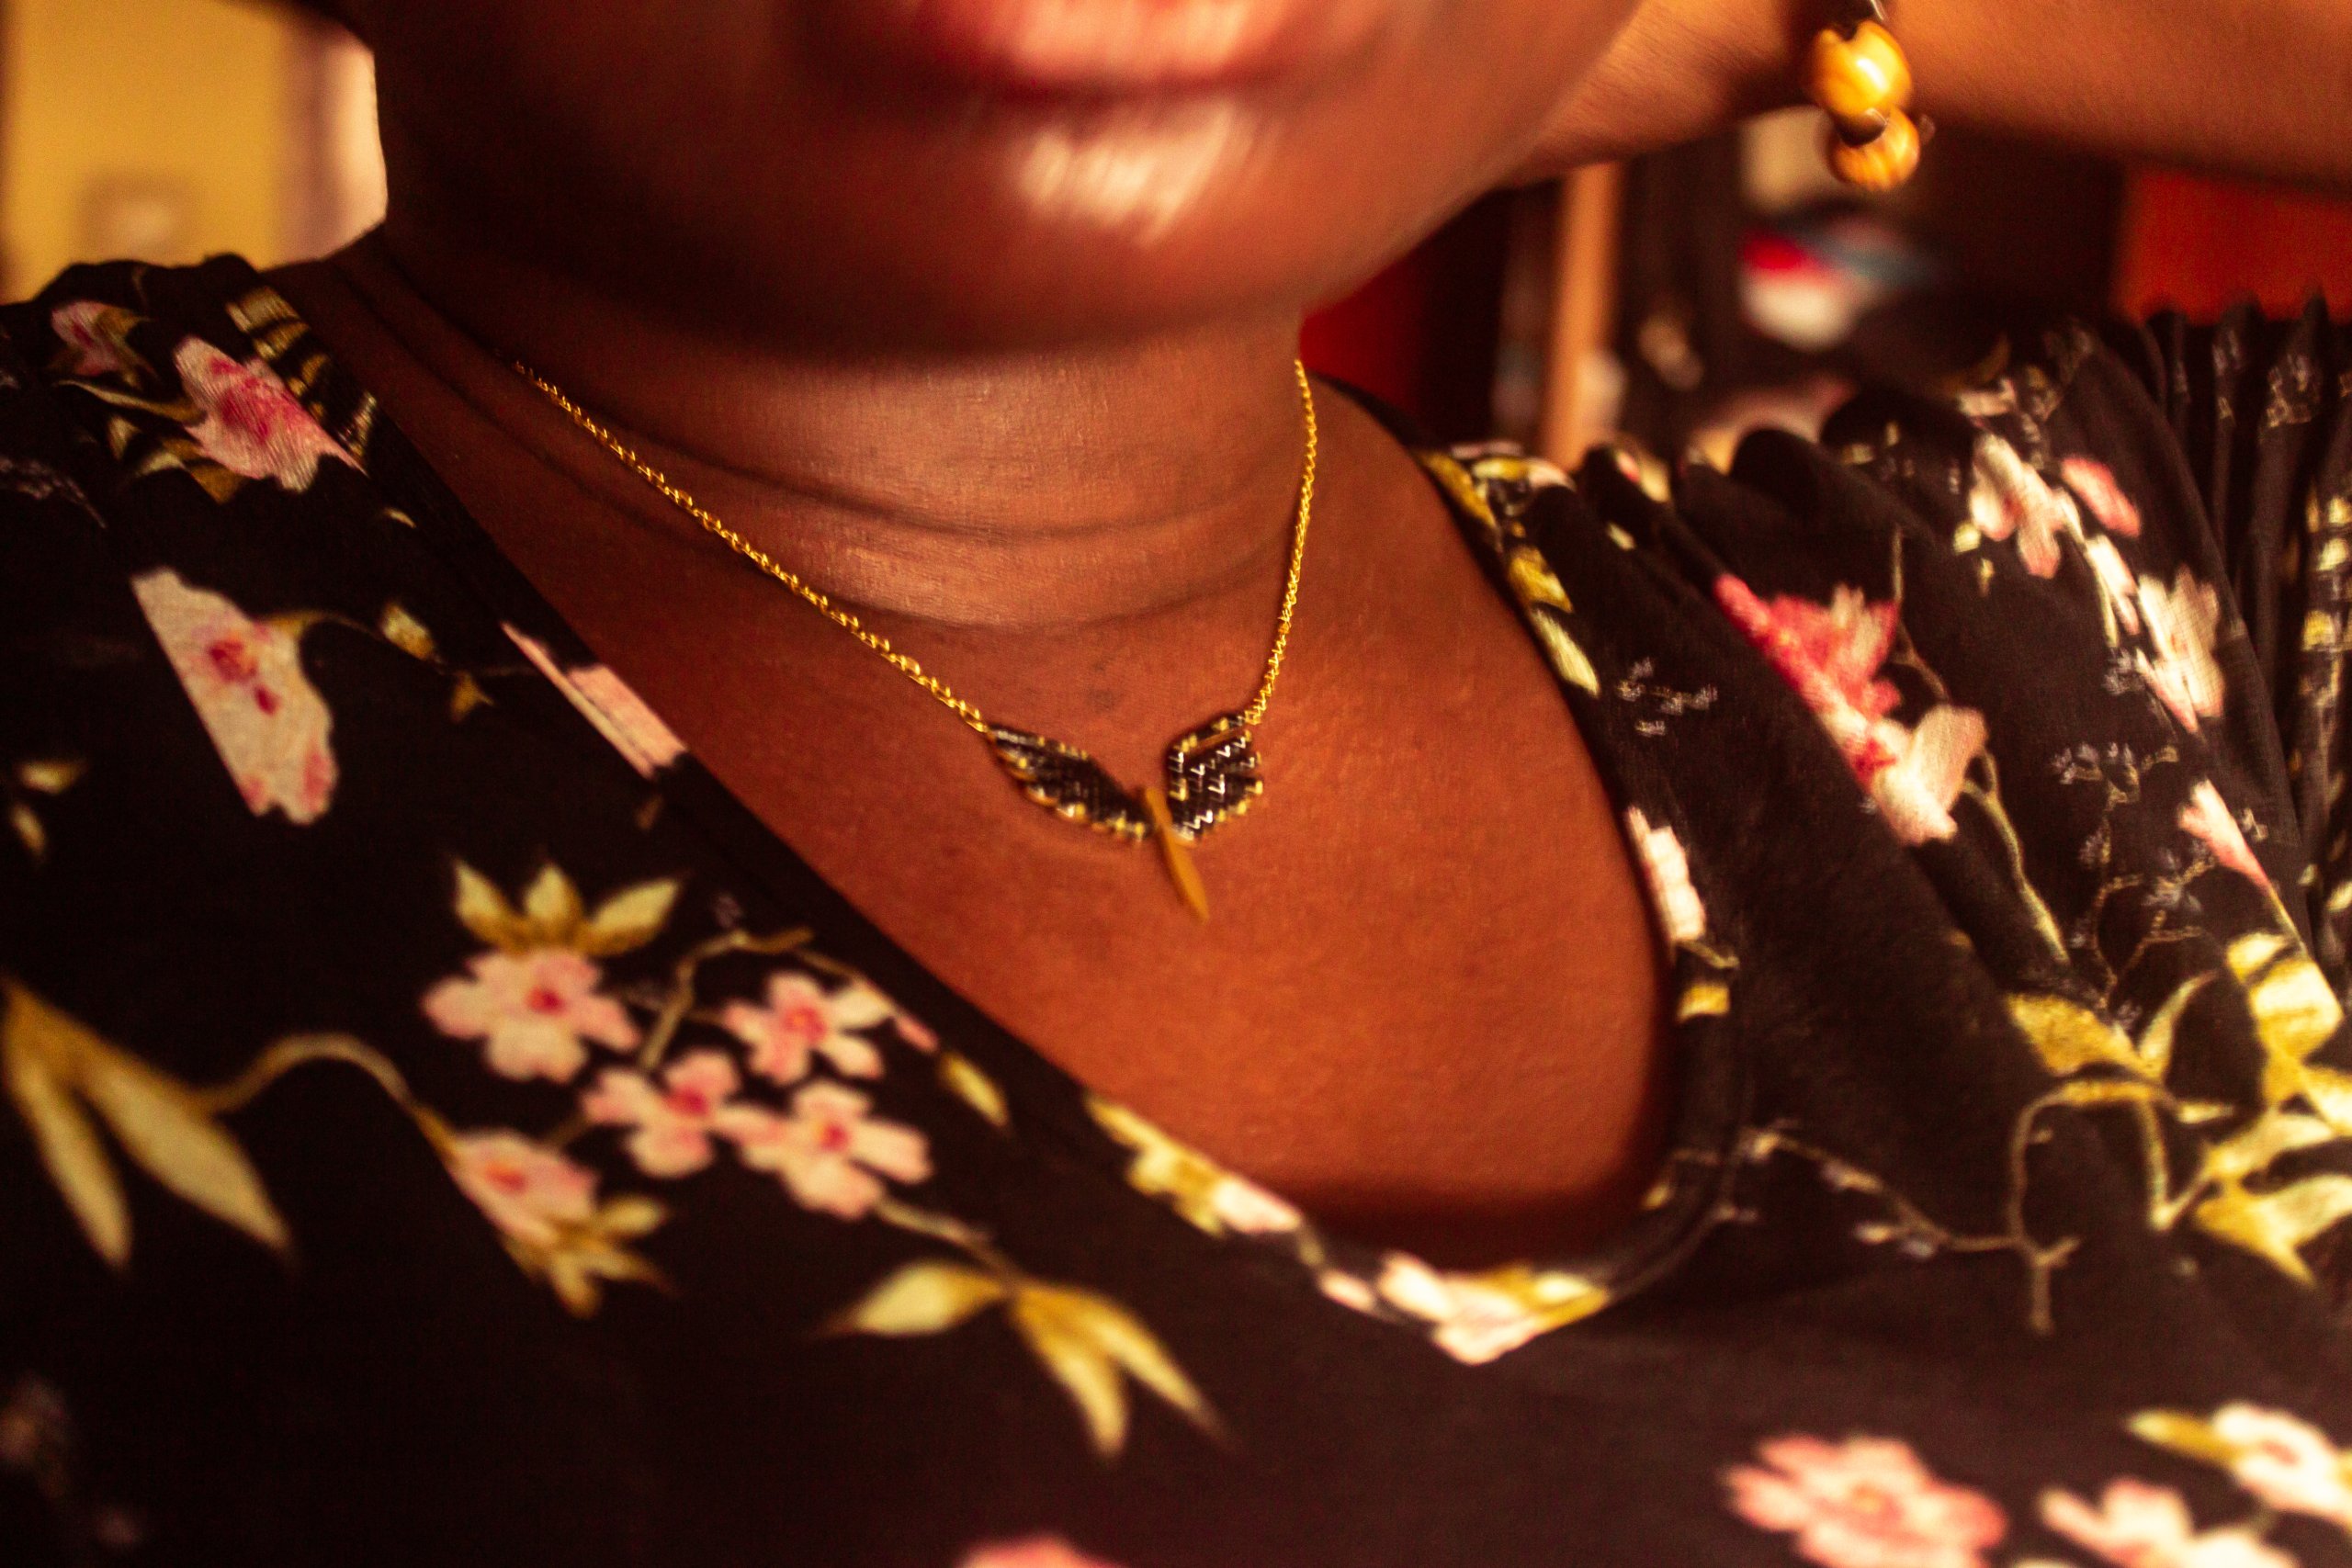 Closeup of Ife's gold necklace.